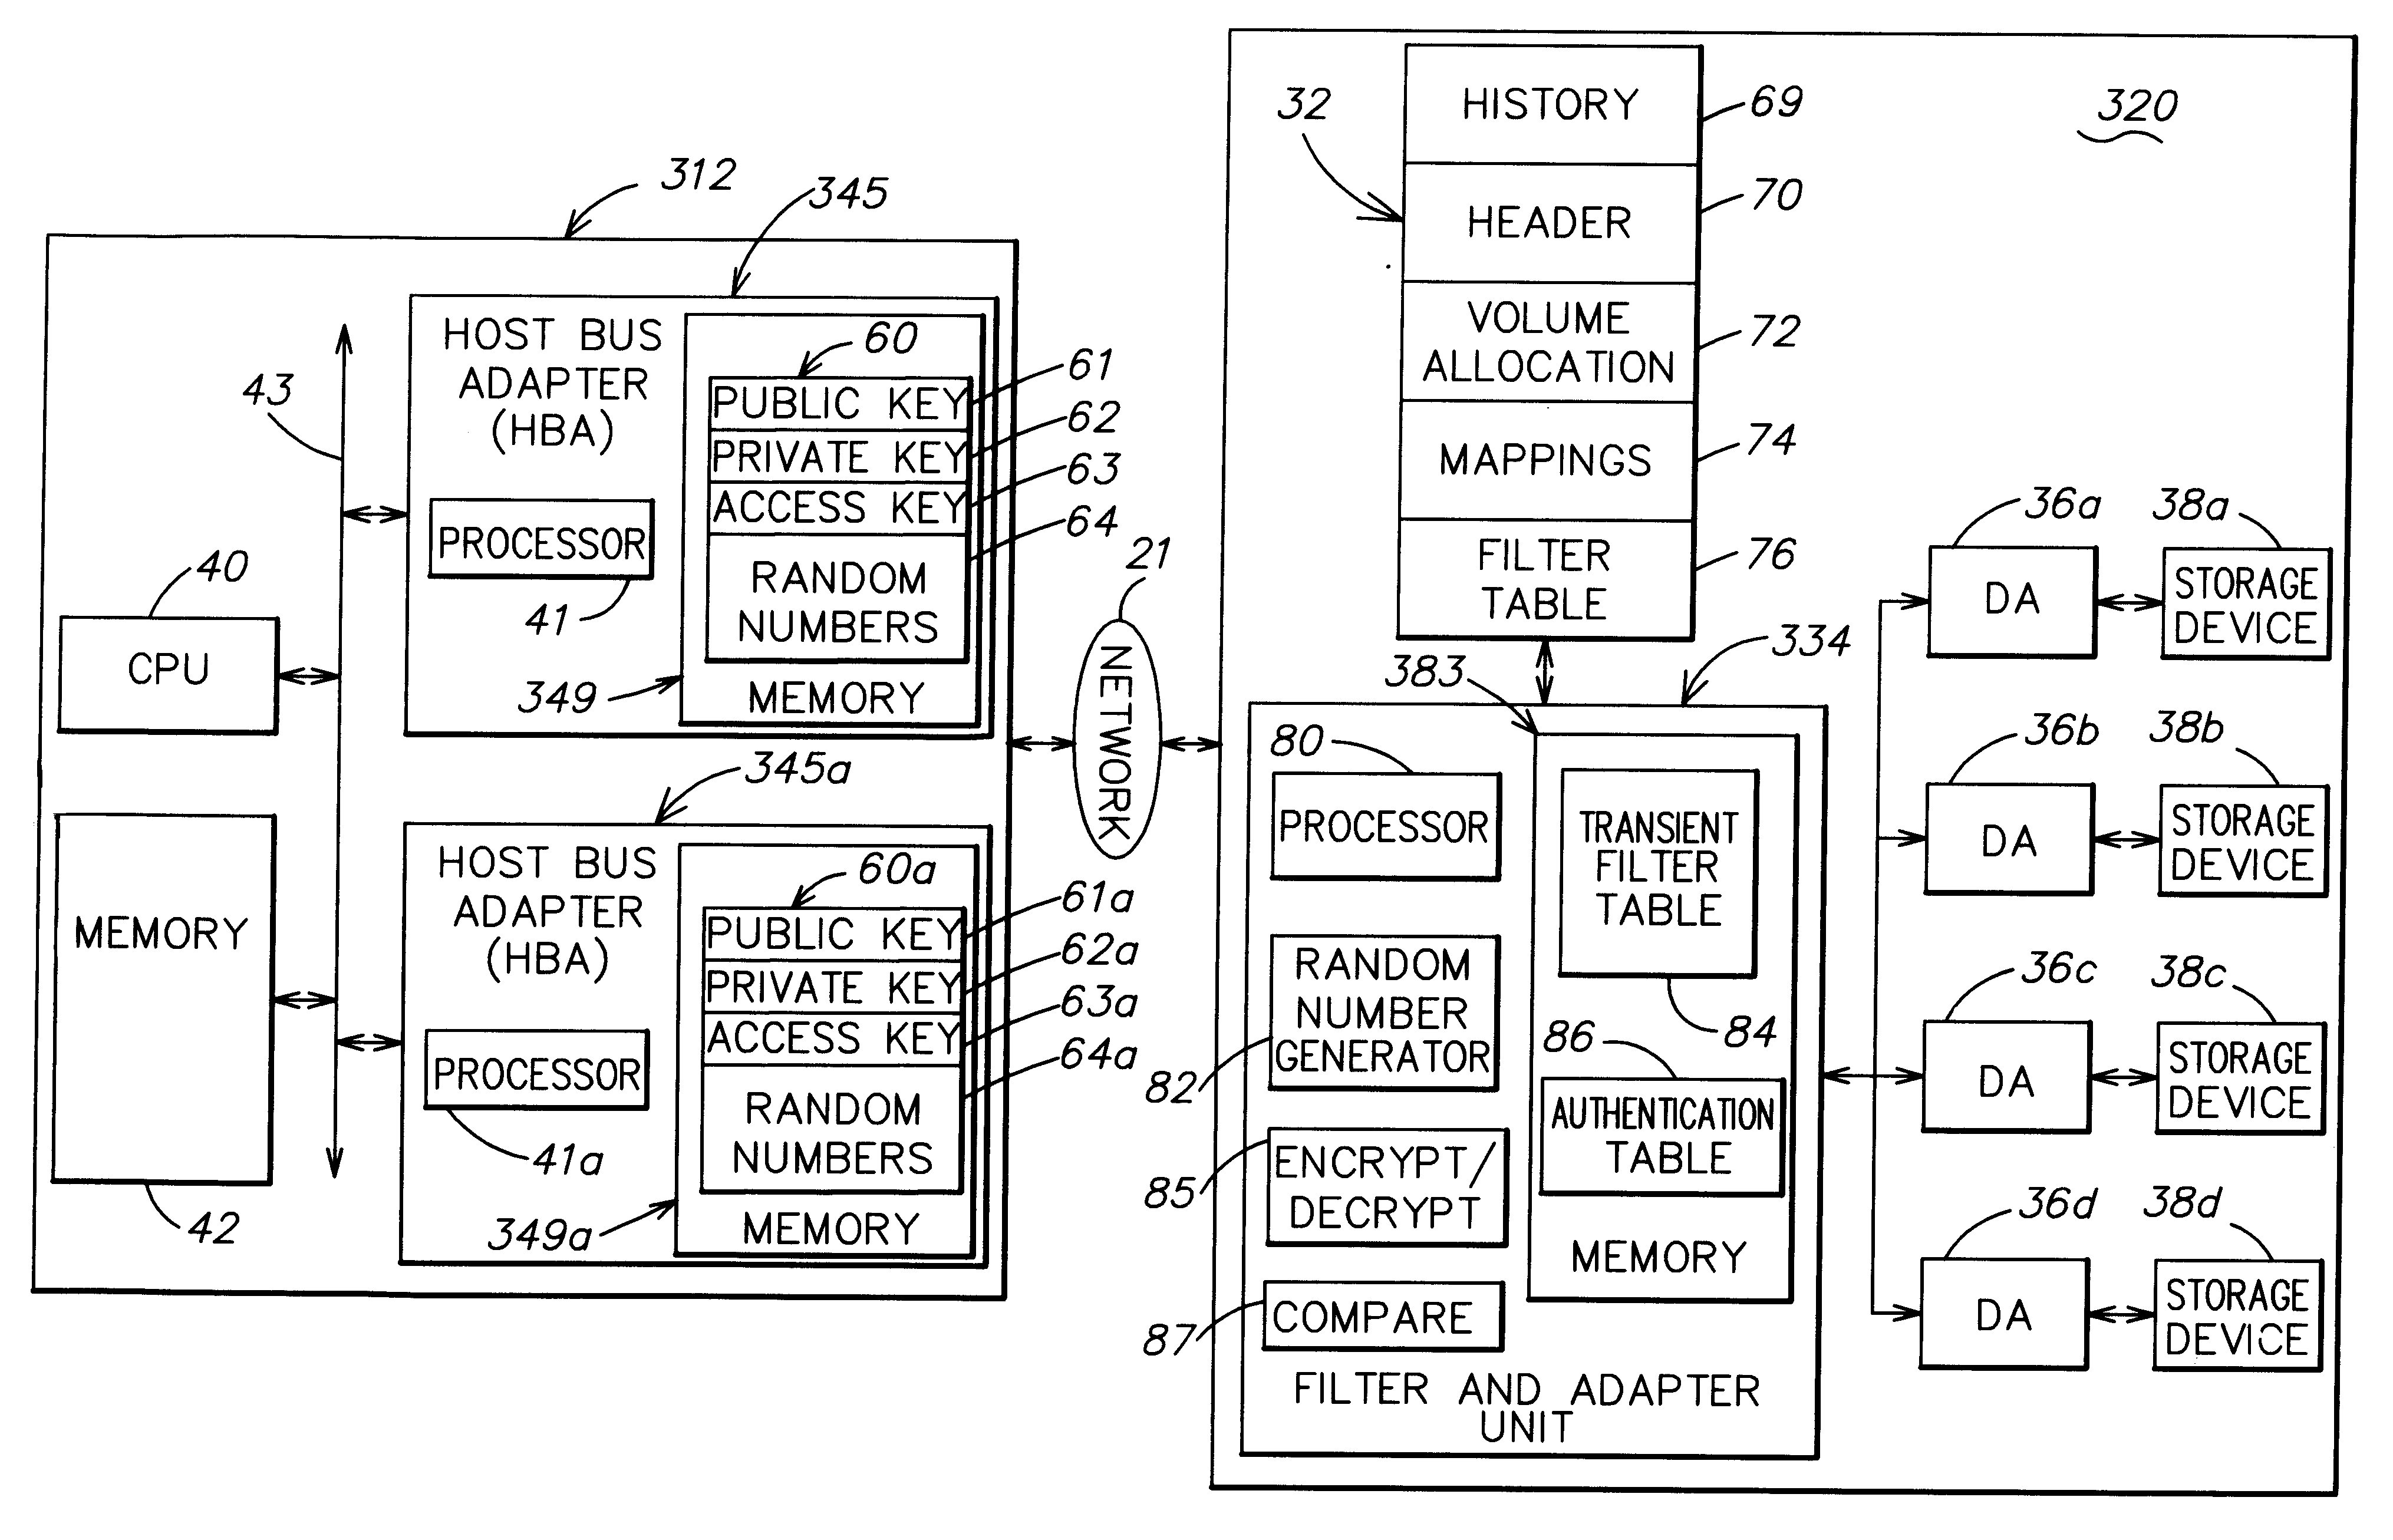 Method and apparatus for authenticating connections to a storage system coupled to a network